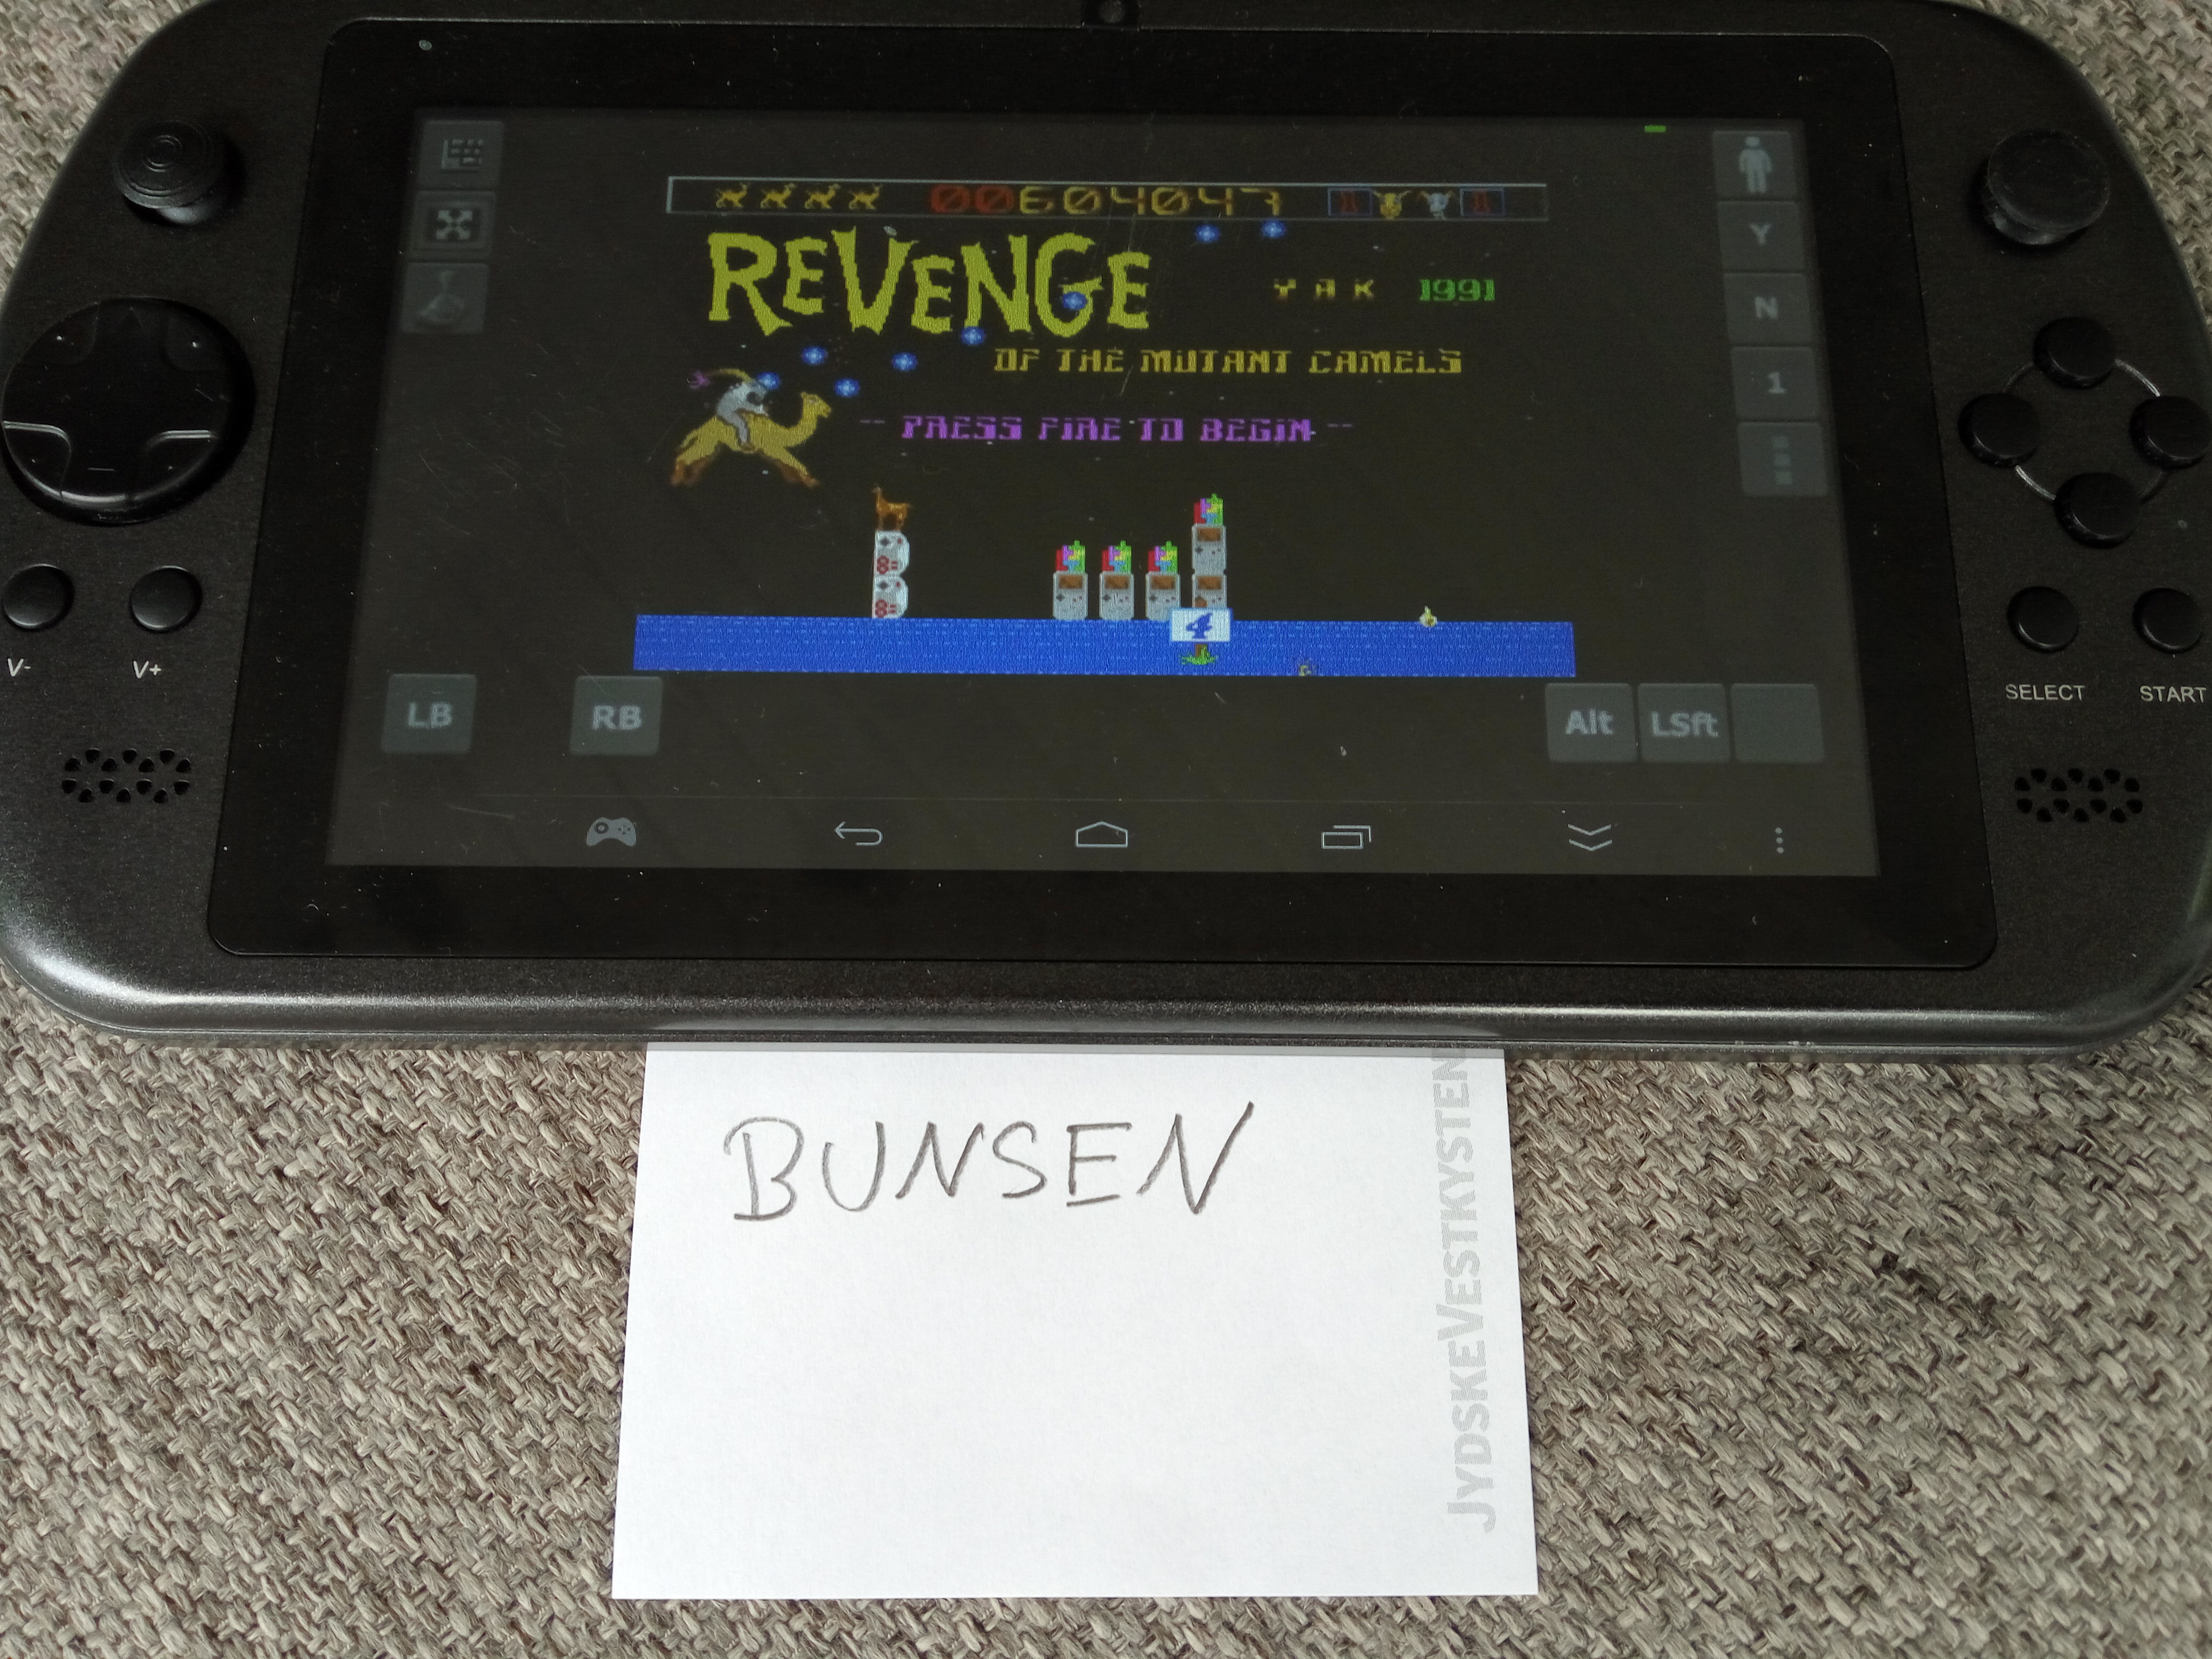 Bunsen: Revenge of the Mutant Camels (Atari ST Emulated) 604,047 points on 2017-10-07 14:19:12